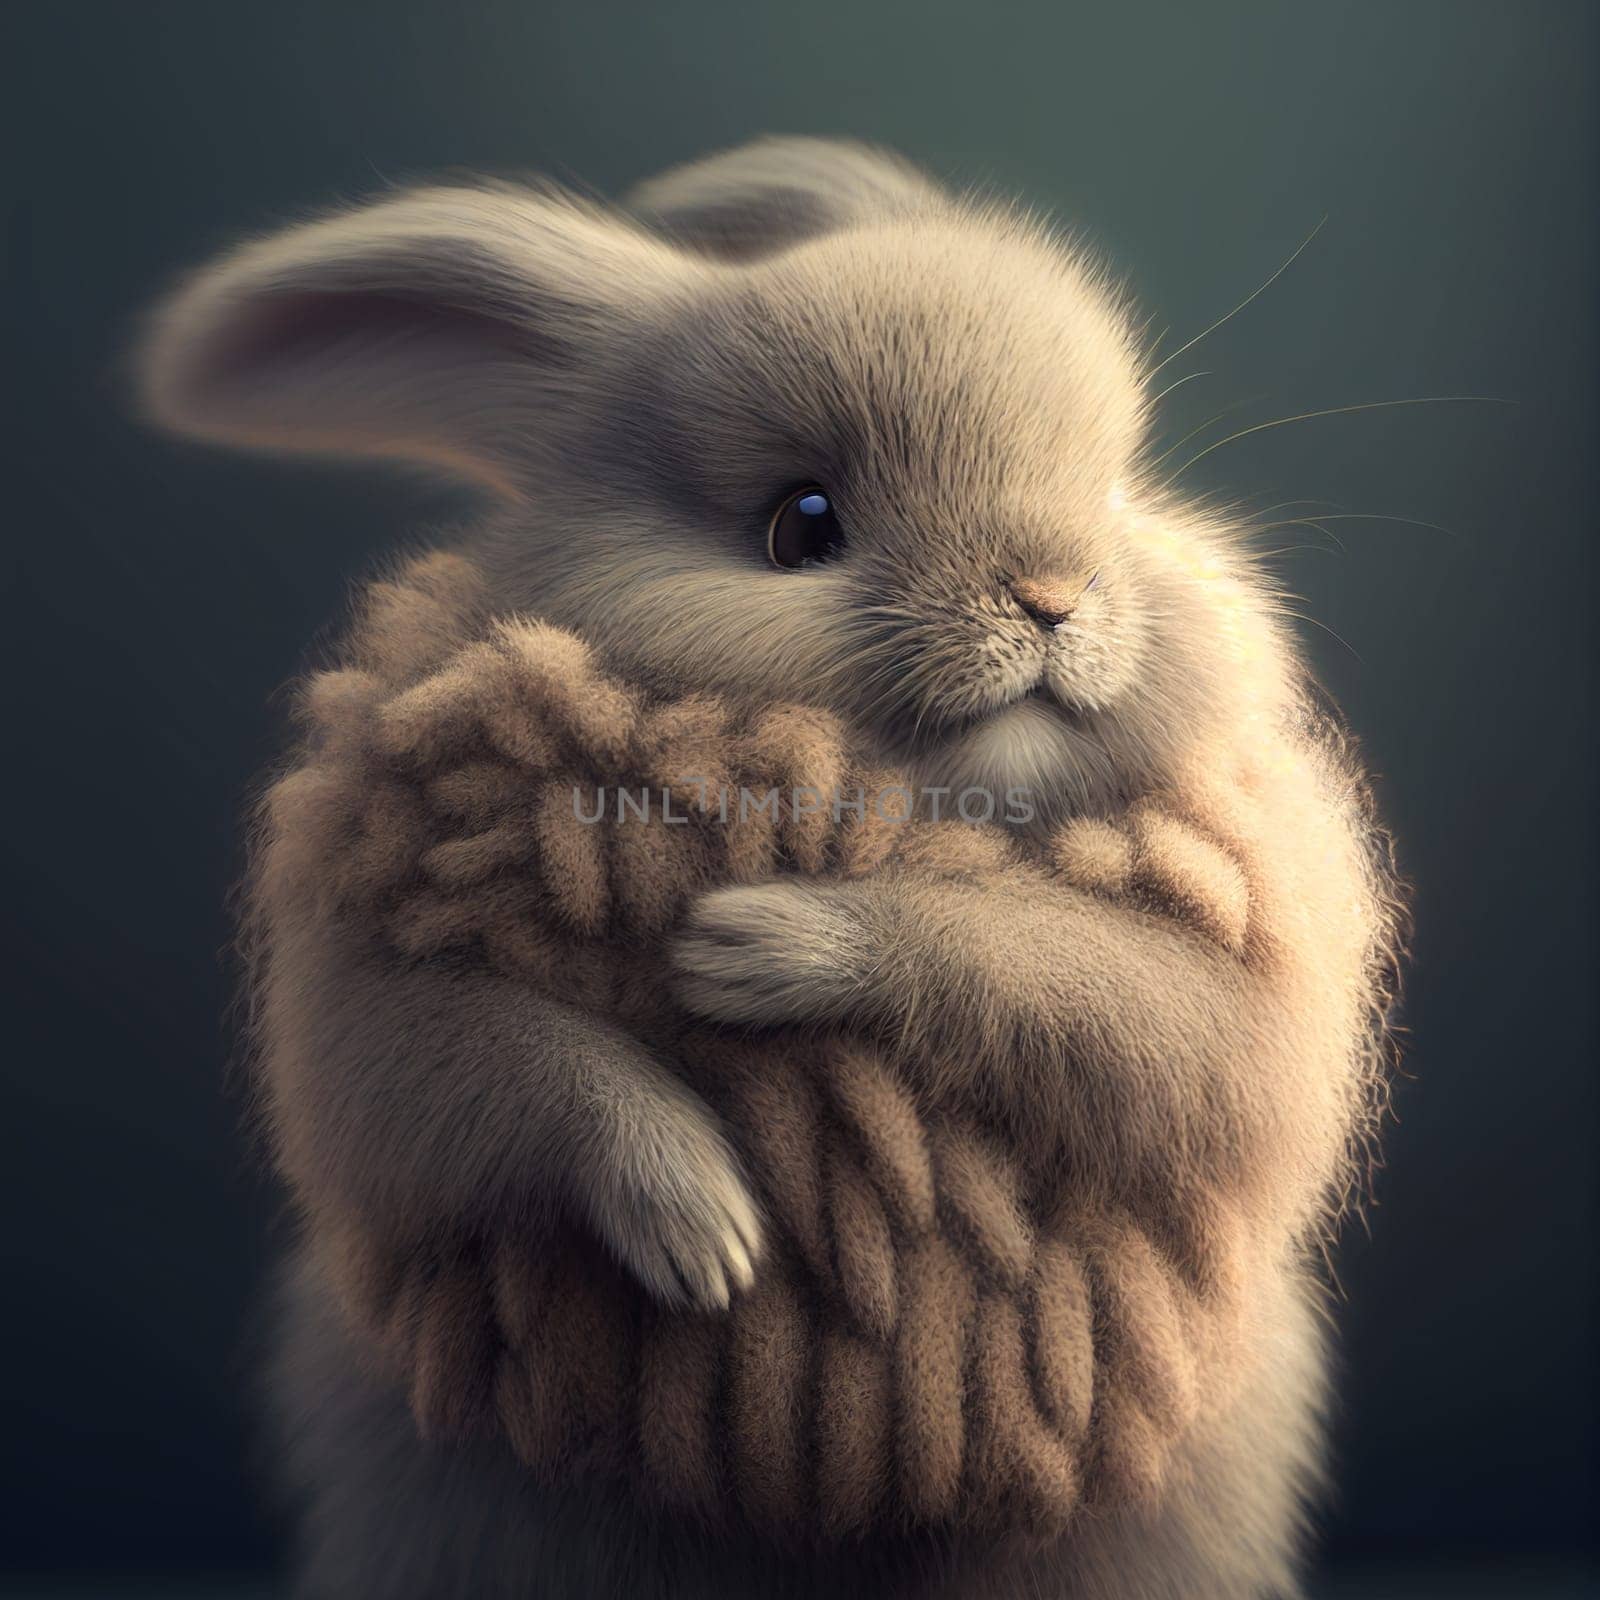 Cute fluffy rabbit hugging red heart. Valentine's Day greetings from romantic bunny holding heart. Generative AI